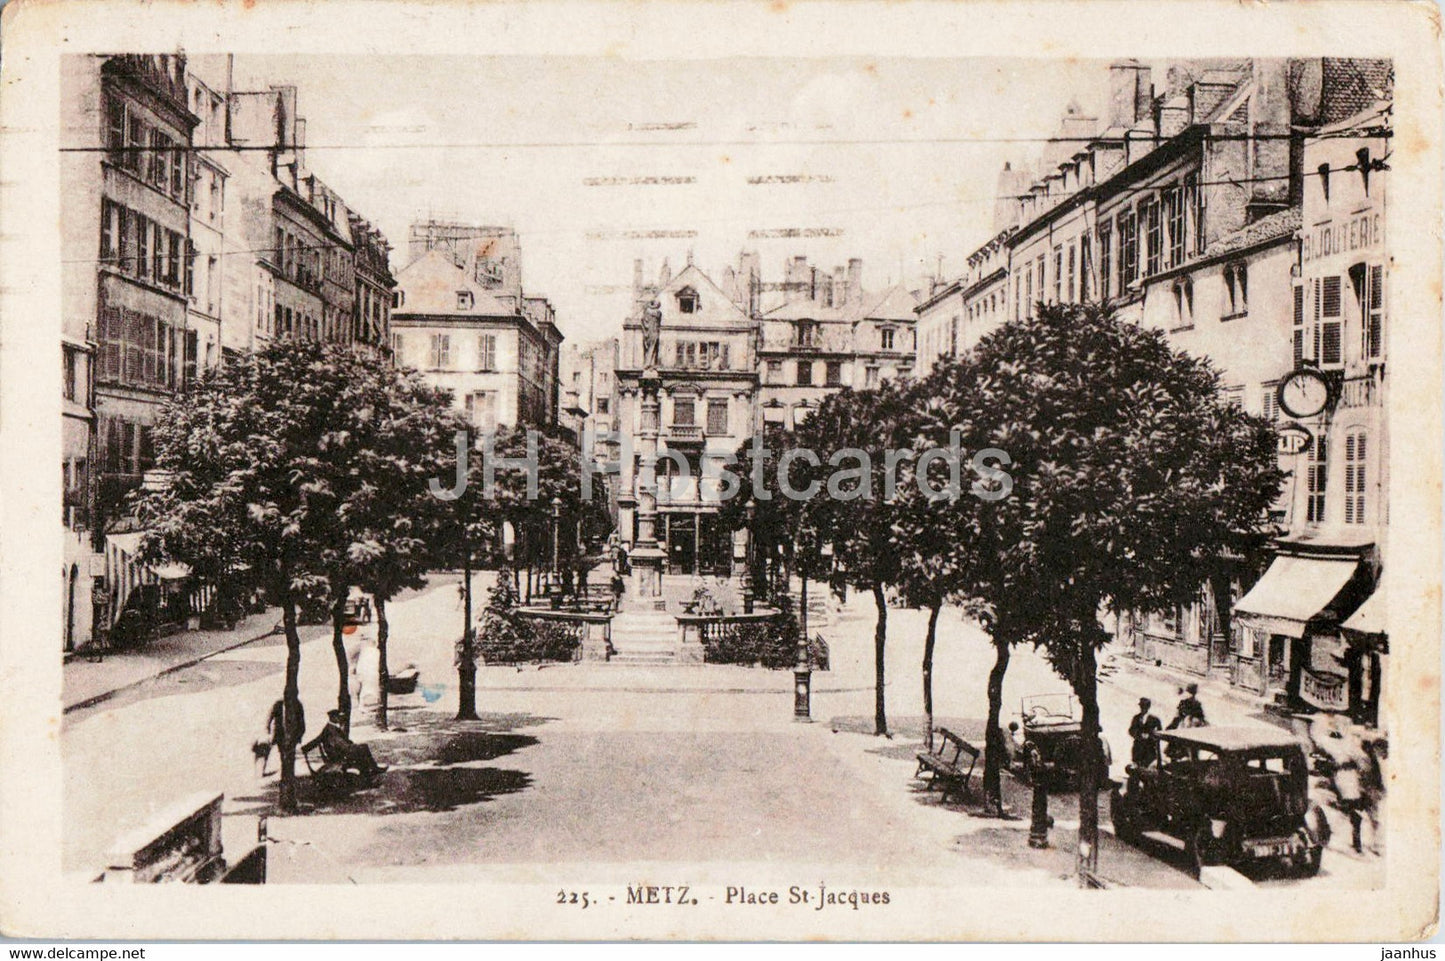 Metz - Place St Jacques - old car - 225 - old postcard - 1931 - France - used - JH Postcards